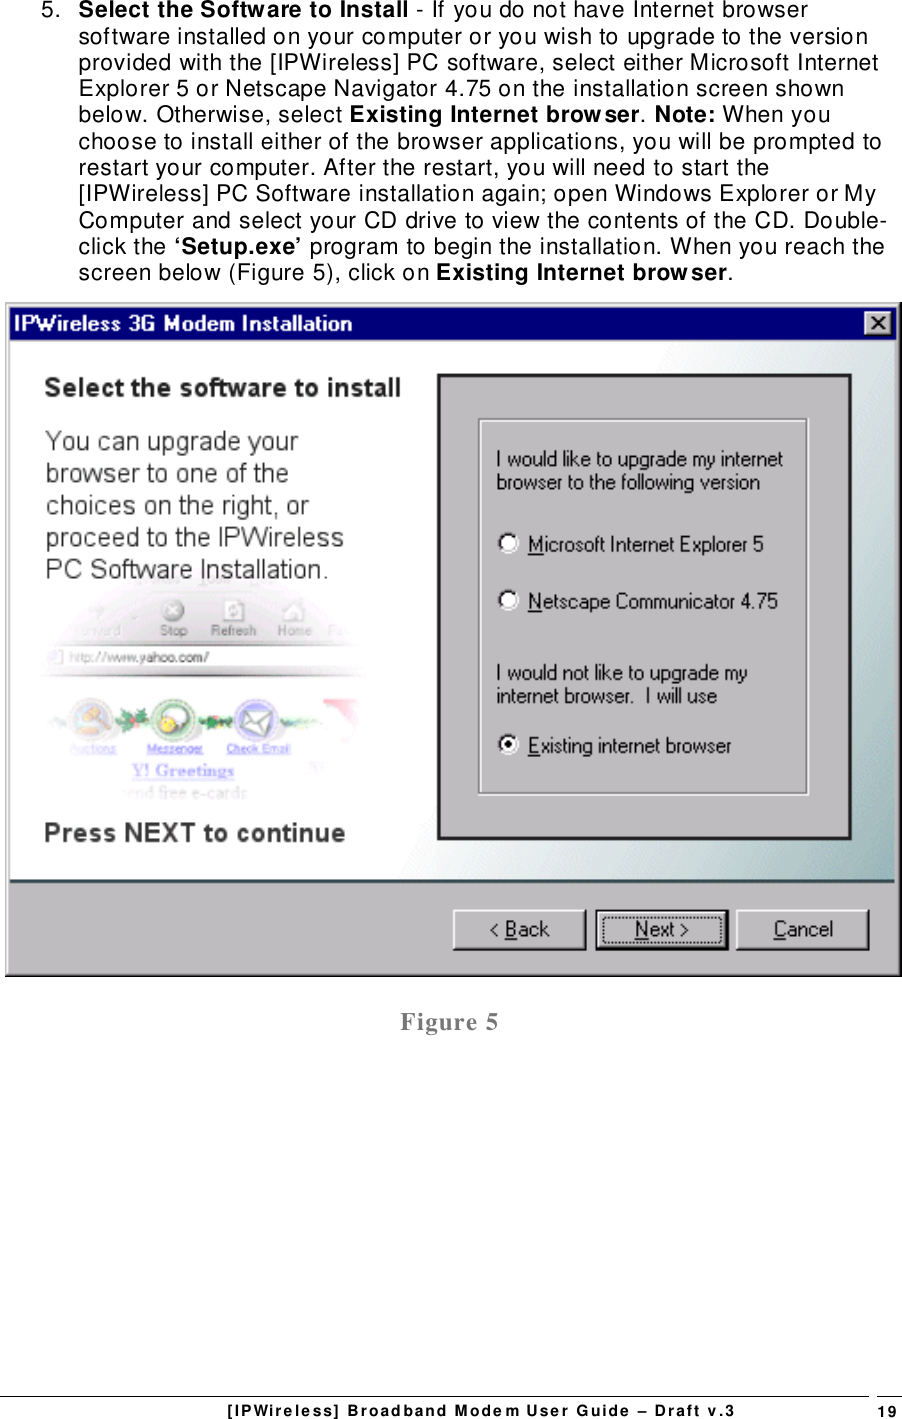 [IPWireless] Broadband Modem User Guide – Draft v.3 195.  Select the Software to Install - If you do not have Internet browsersoftware installed on your computer or you wish to upgrade to the versionprovided with the [IPWireless] PC software, select either Microsoft InternetExplorer 5 or Netscape Navigator 4.75 on the installation screen shownbelow. Otherwise, select Existing Internet browser. Note: When youchoose to install either of the browser applications, you will be prompted torestart your computer. After the restart, you will need to start the[IPWireless] PC Software installation again; open Windows Explorer or MyComputer and select your CD drive to view the contents of the CD. Double-click the ‘Setup.exe’ program to begin the installation. When you reach thescreen below (Figure 5), click on Existing Internet browser.Figure 5